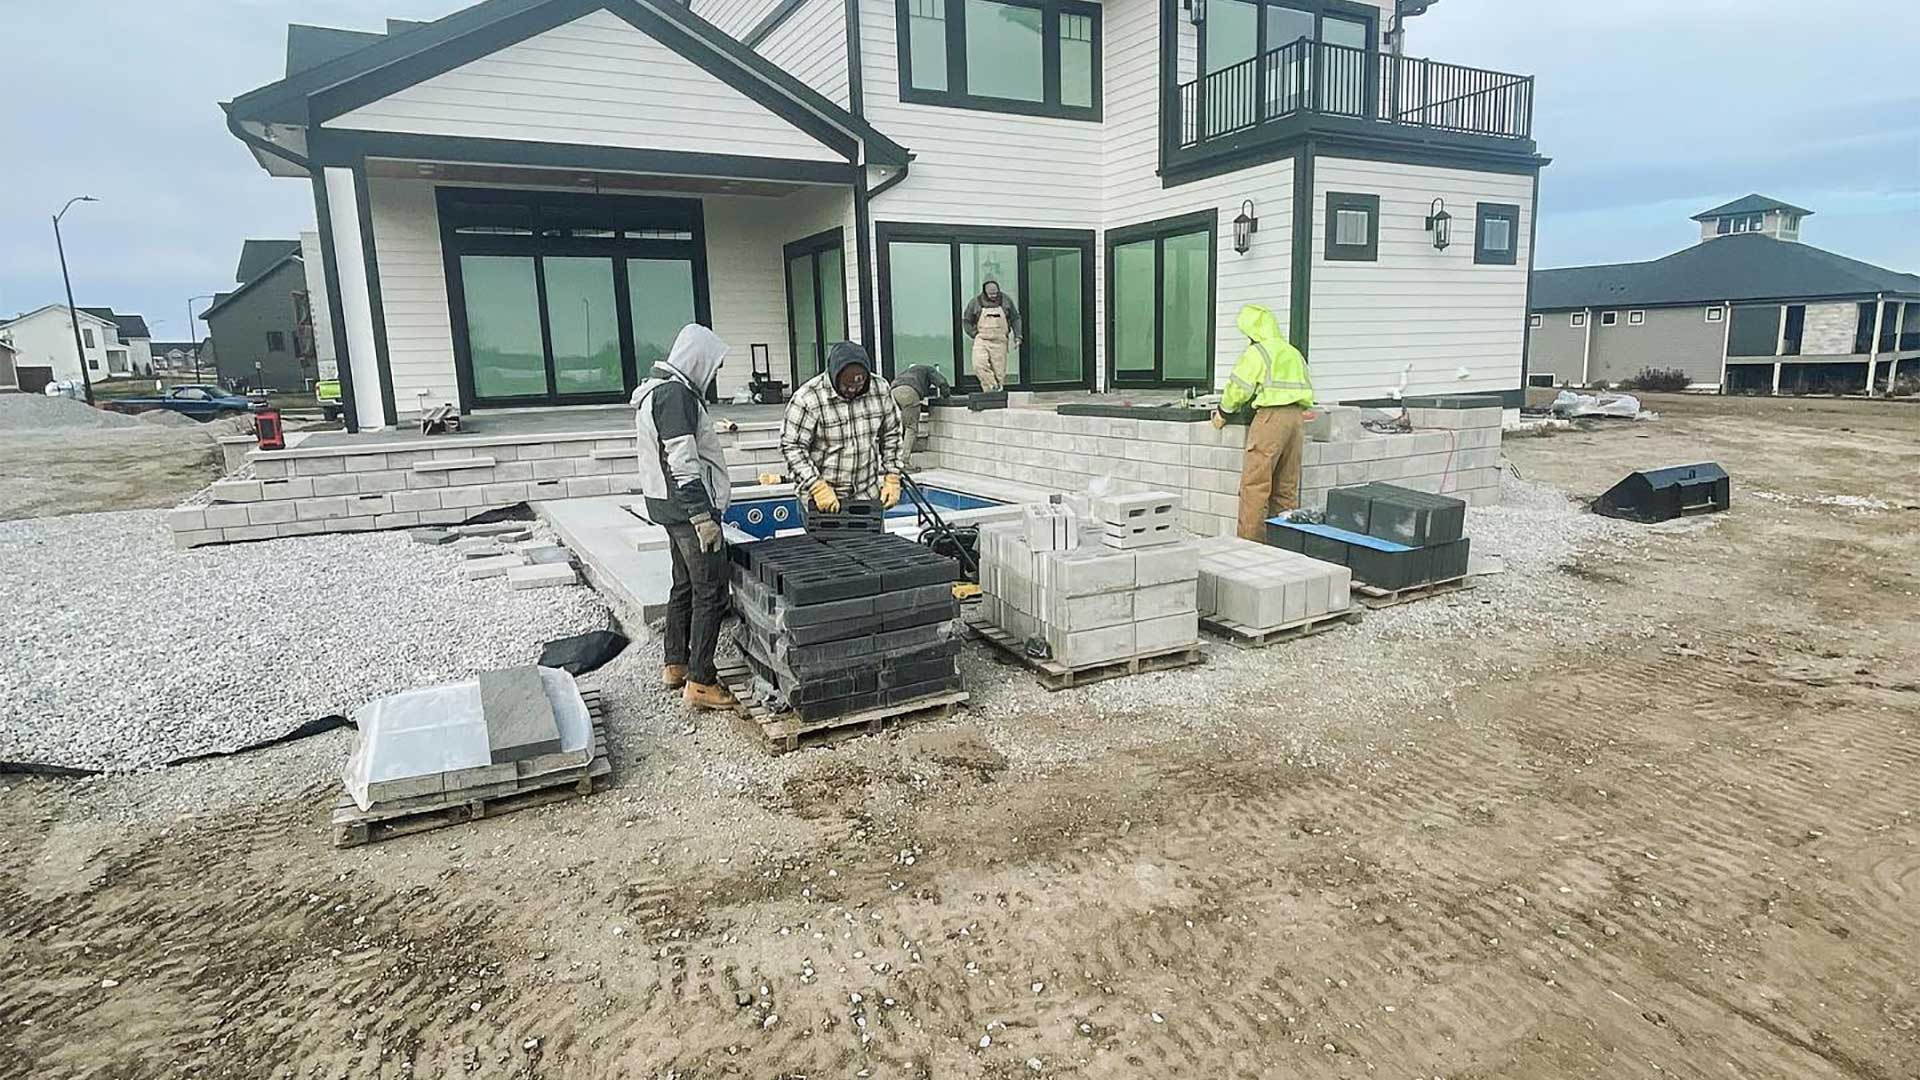 Ankeny Lawn & Landscapes crew constructing a patio in Ankeny, IA.